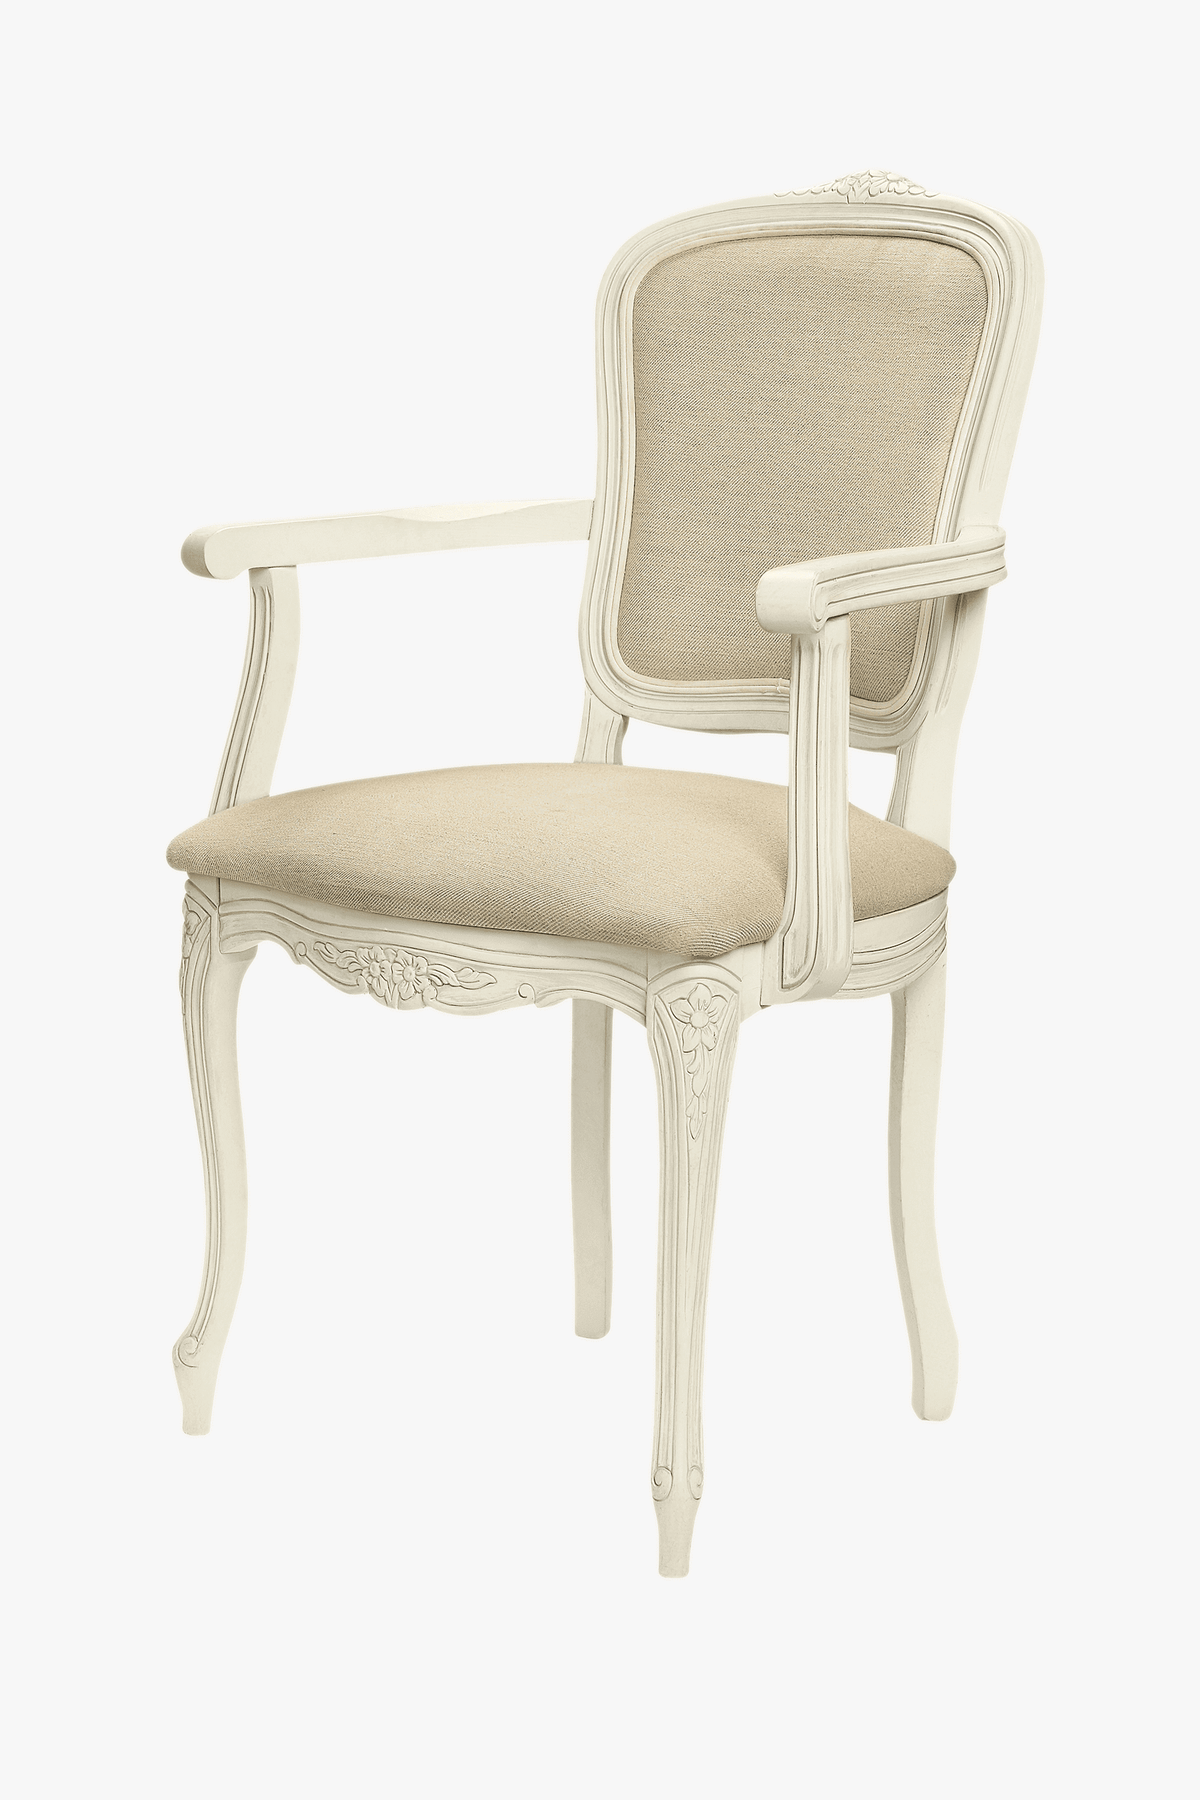 Provencale Carver Chair